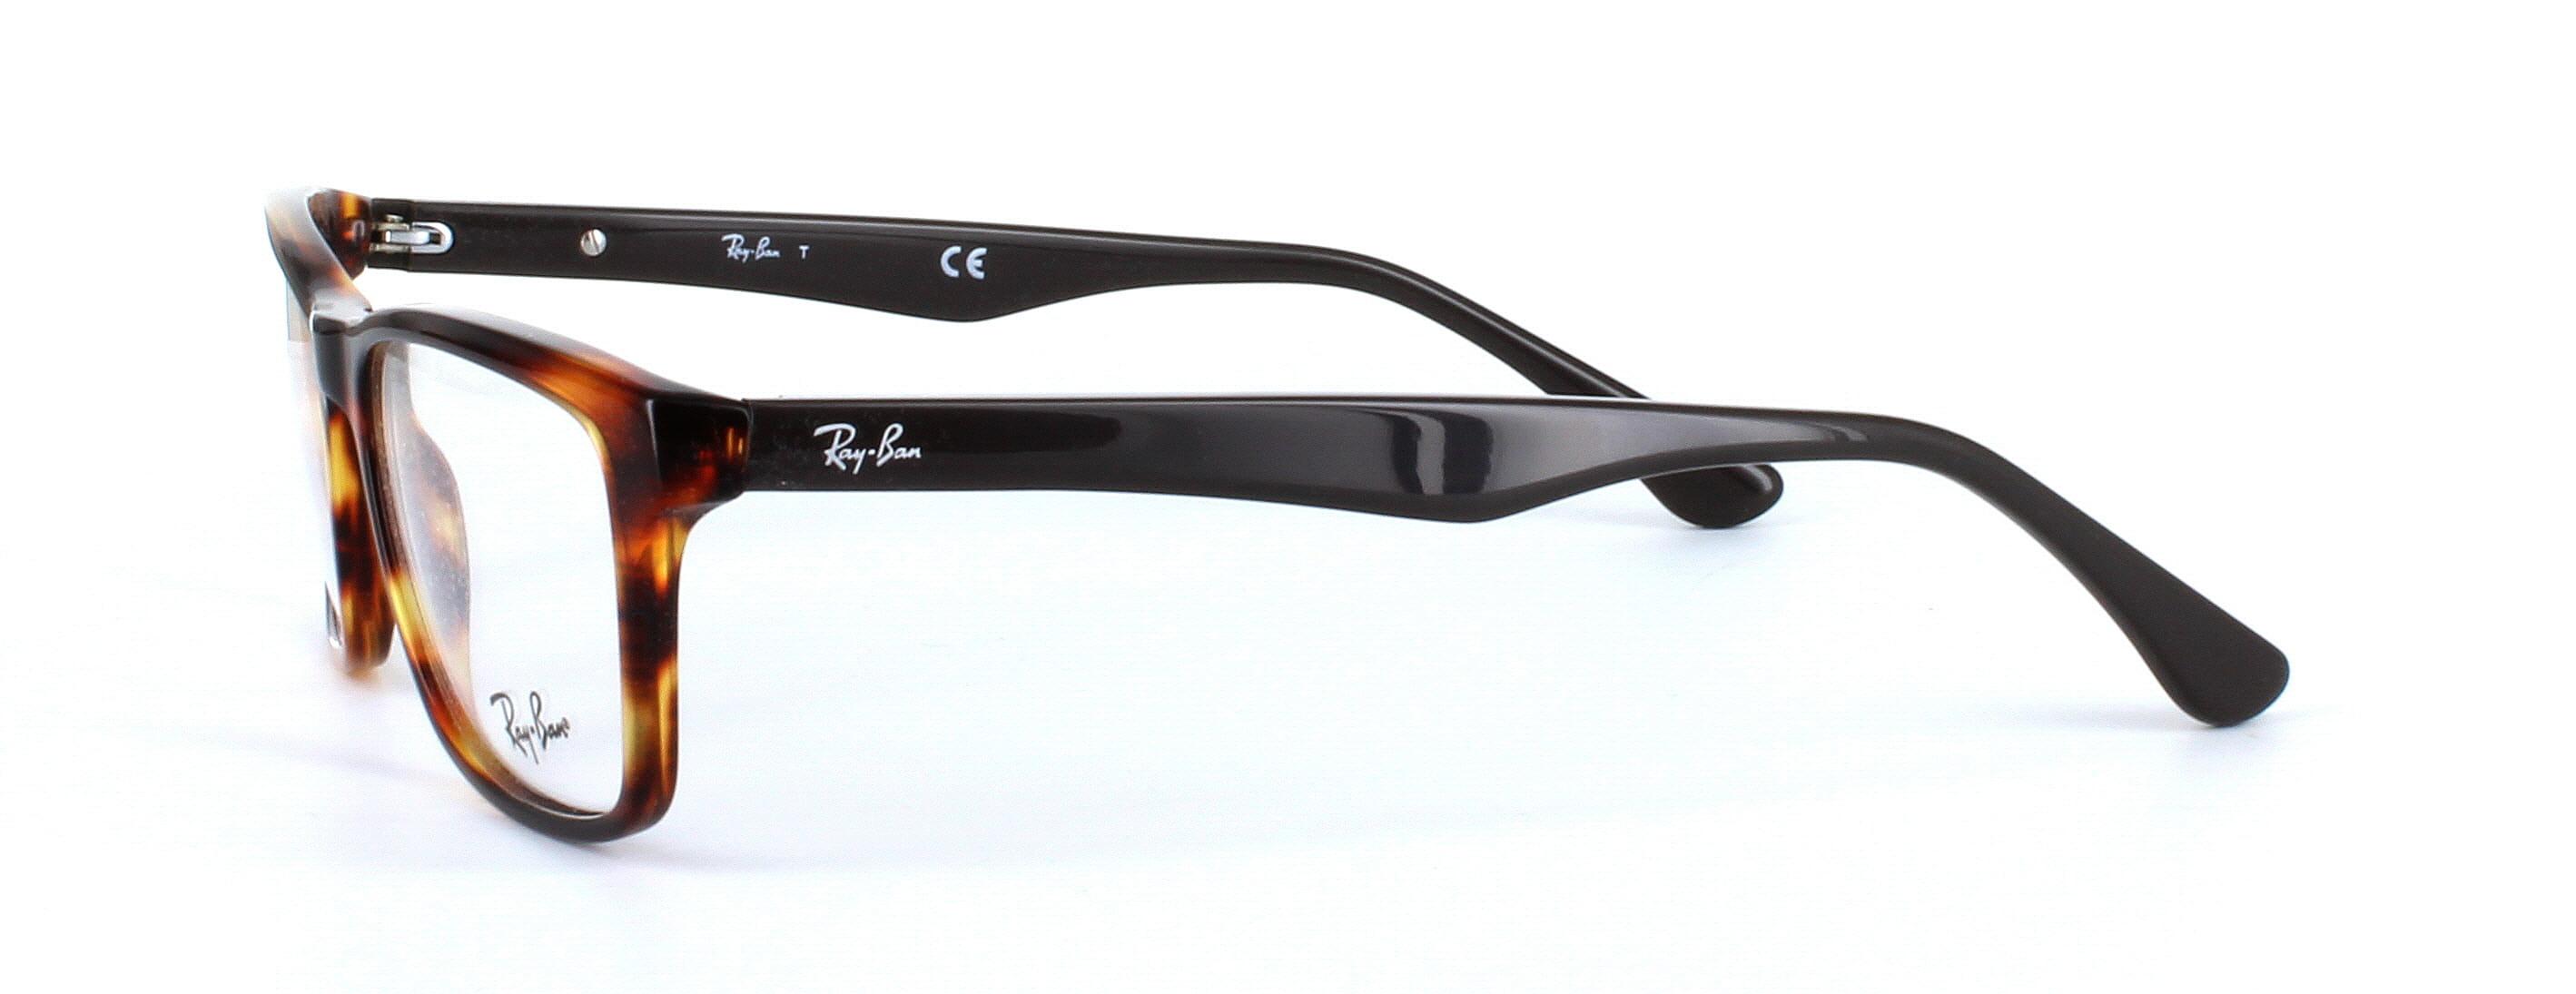 Unisex acetate glasses frame - ray ban 5279 - image view 2